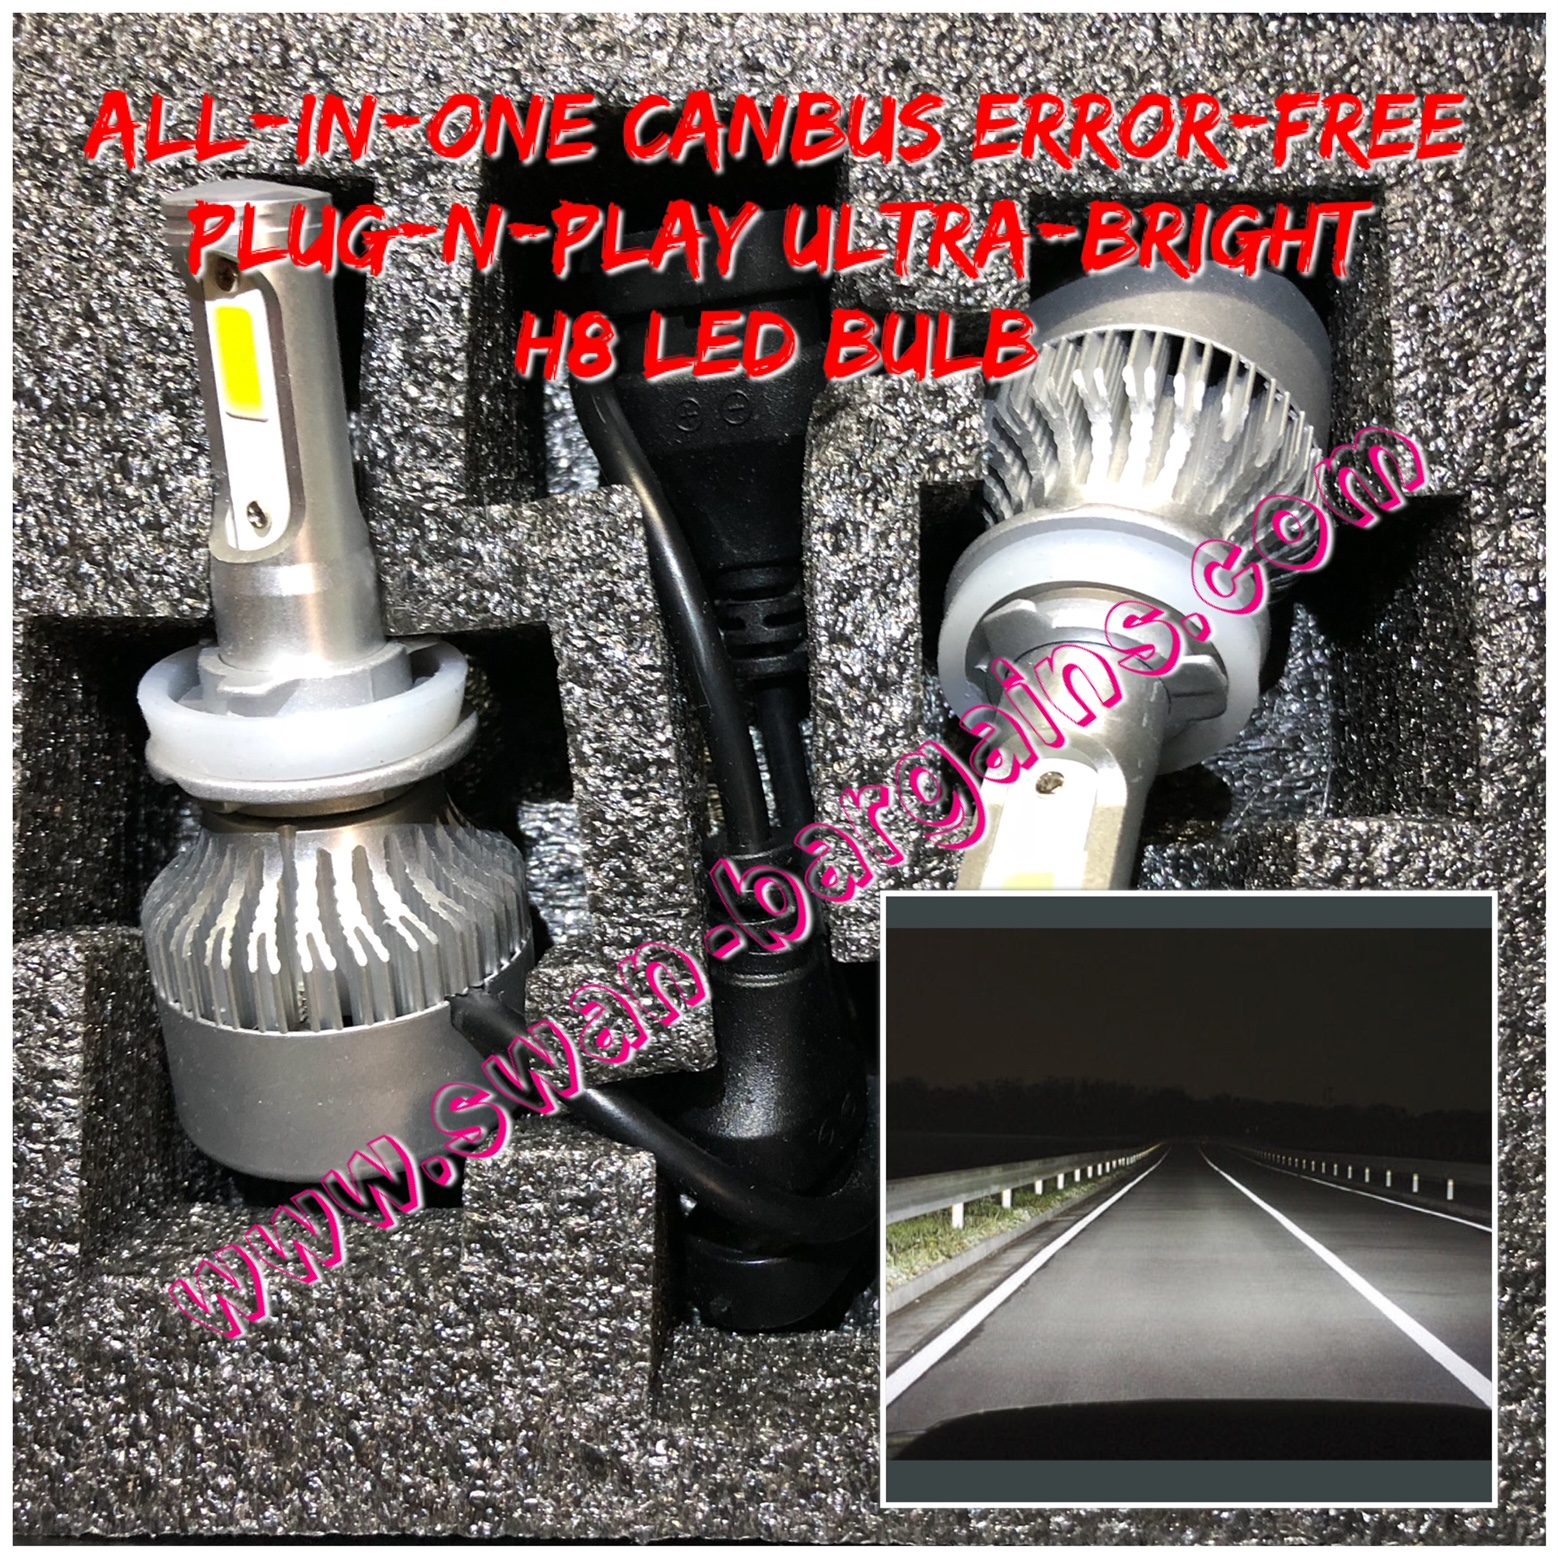 Ultra Bright H8 All-in-One LED Headlamp Bulb Singapore